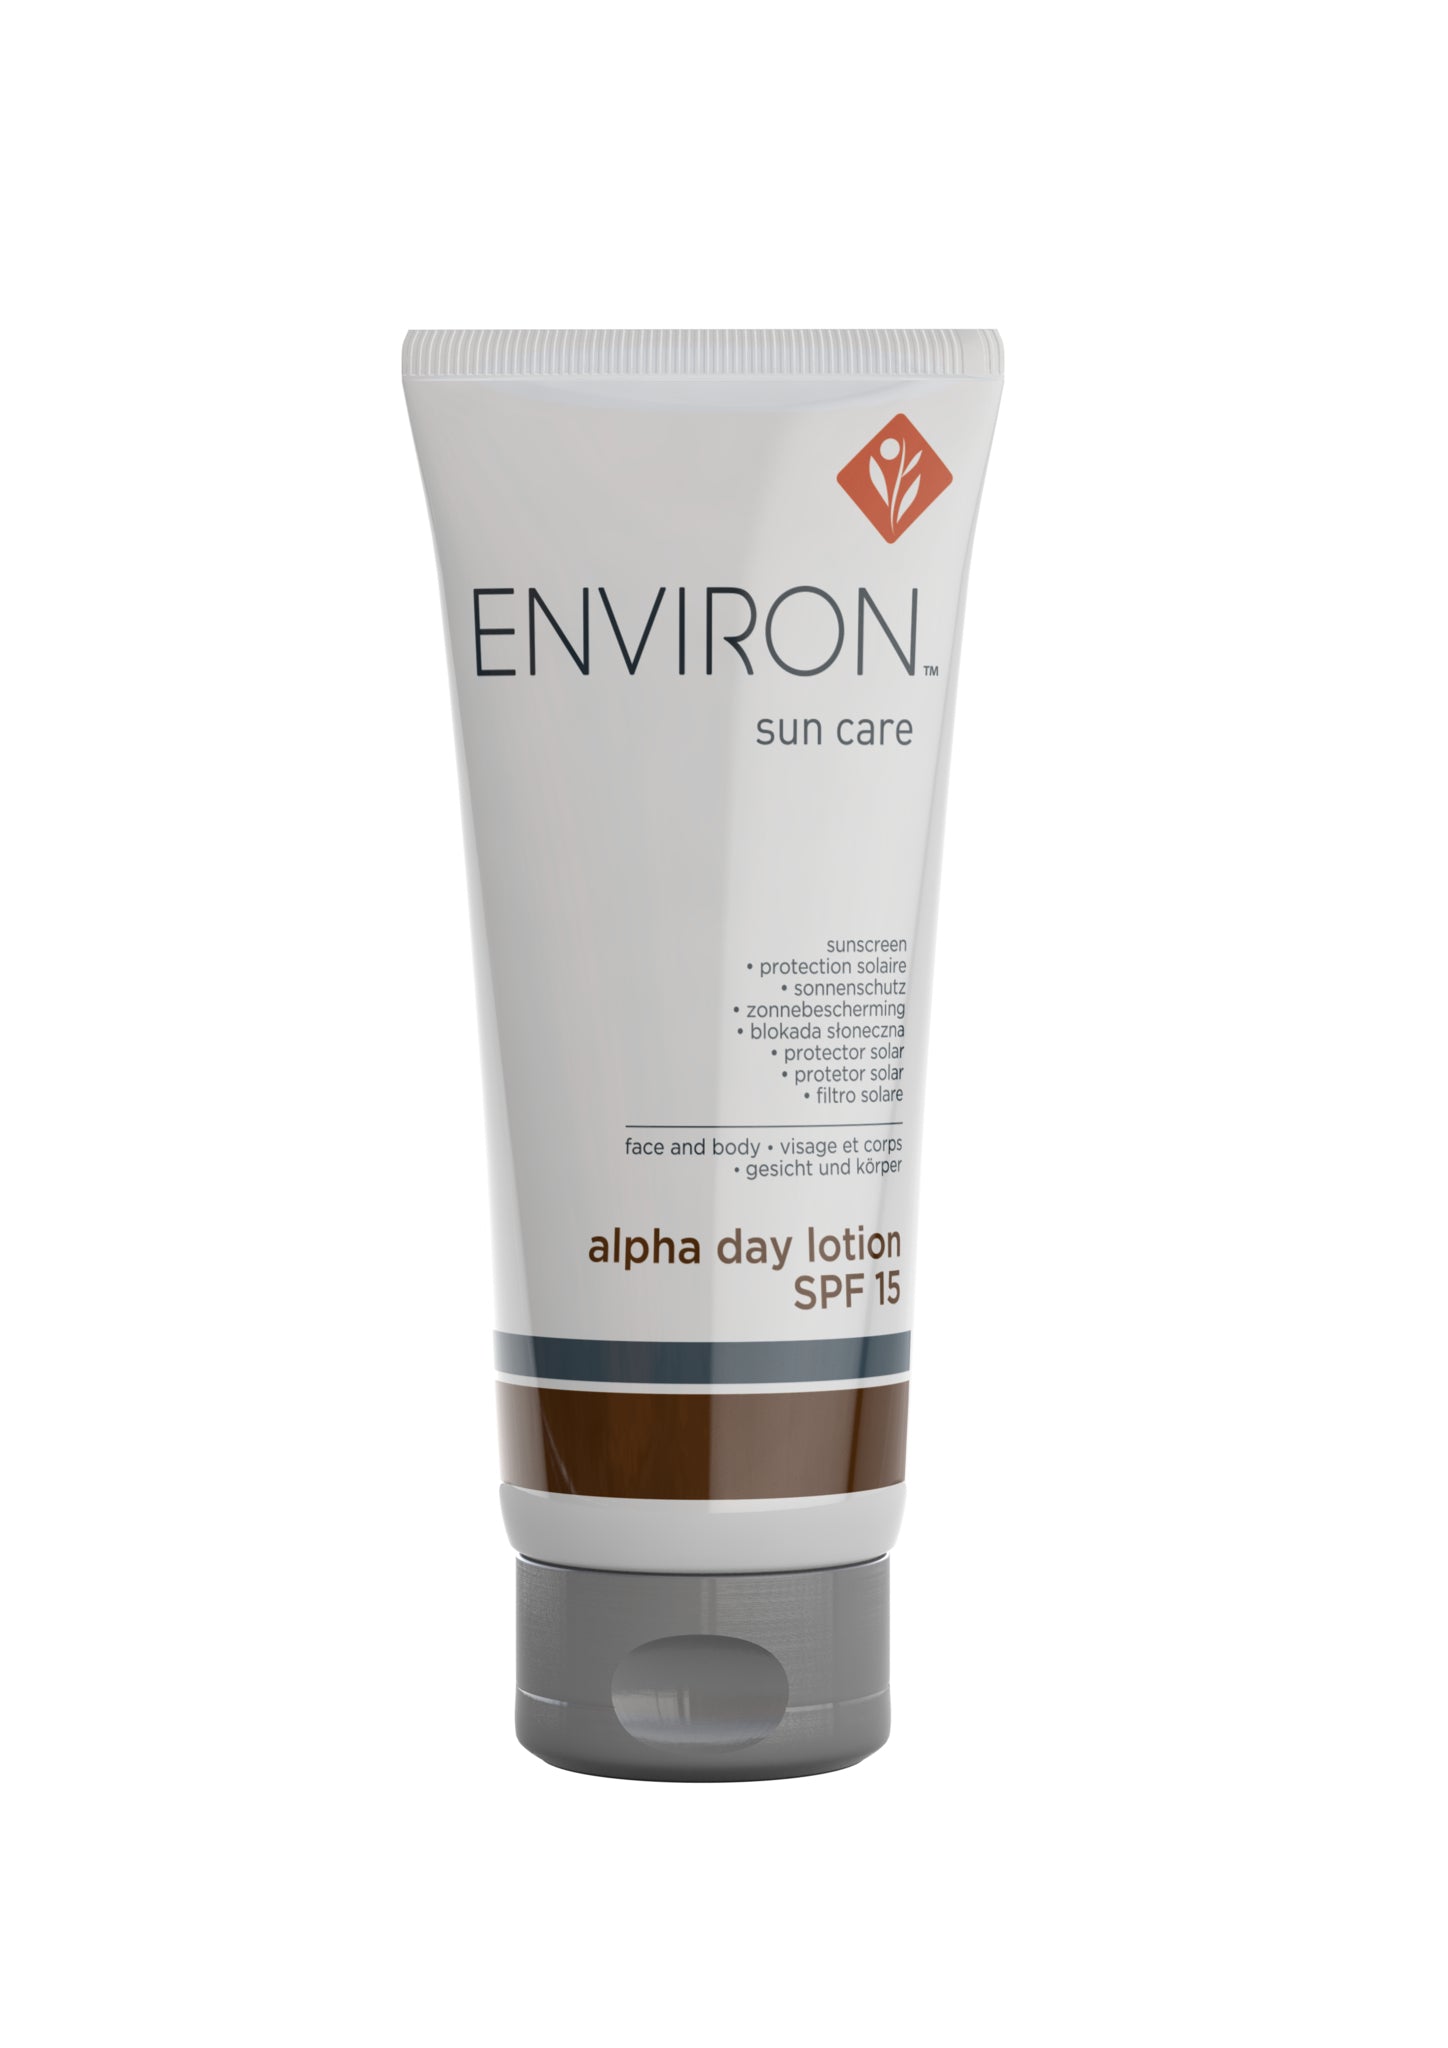 Environ's Even More SunCare+ Range Alpha Day Lotion SPF 15 helps protect skin from the harmful effects of the sun.